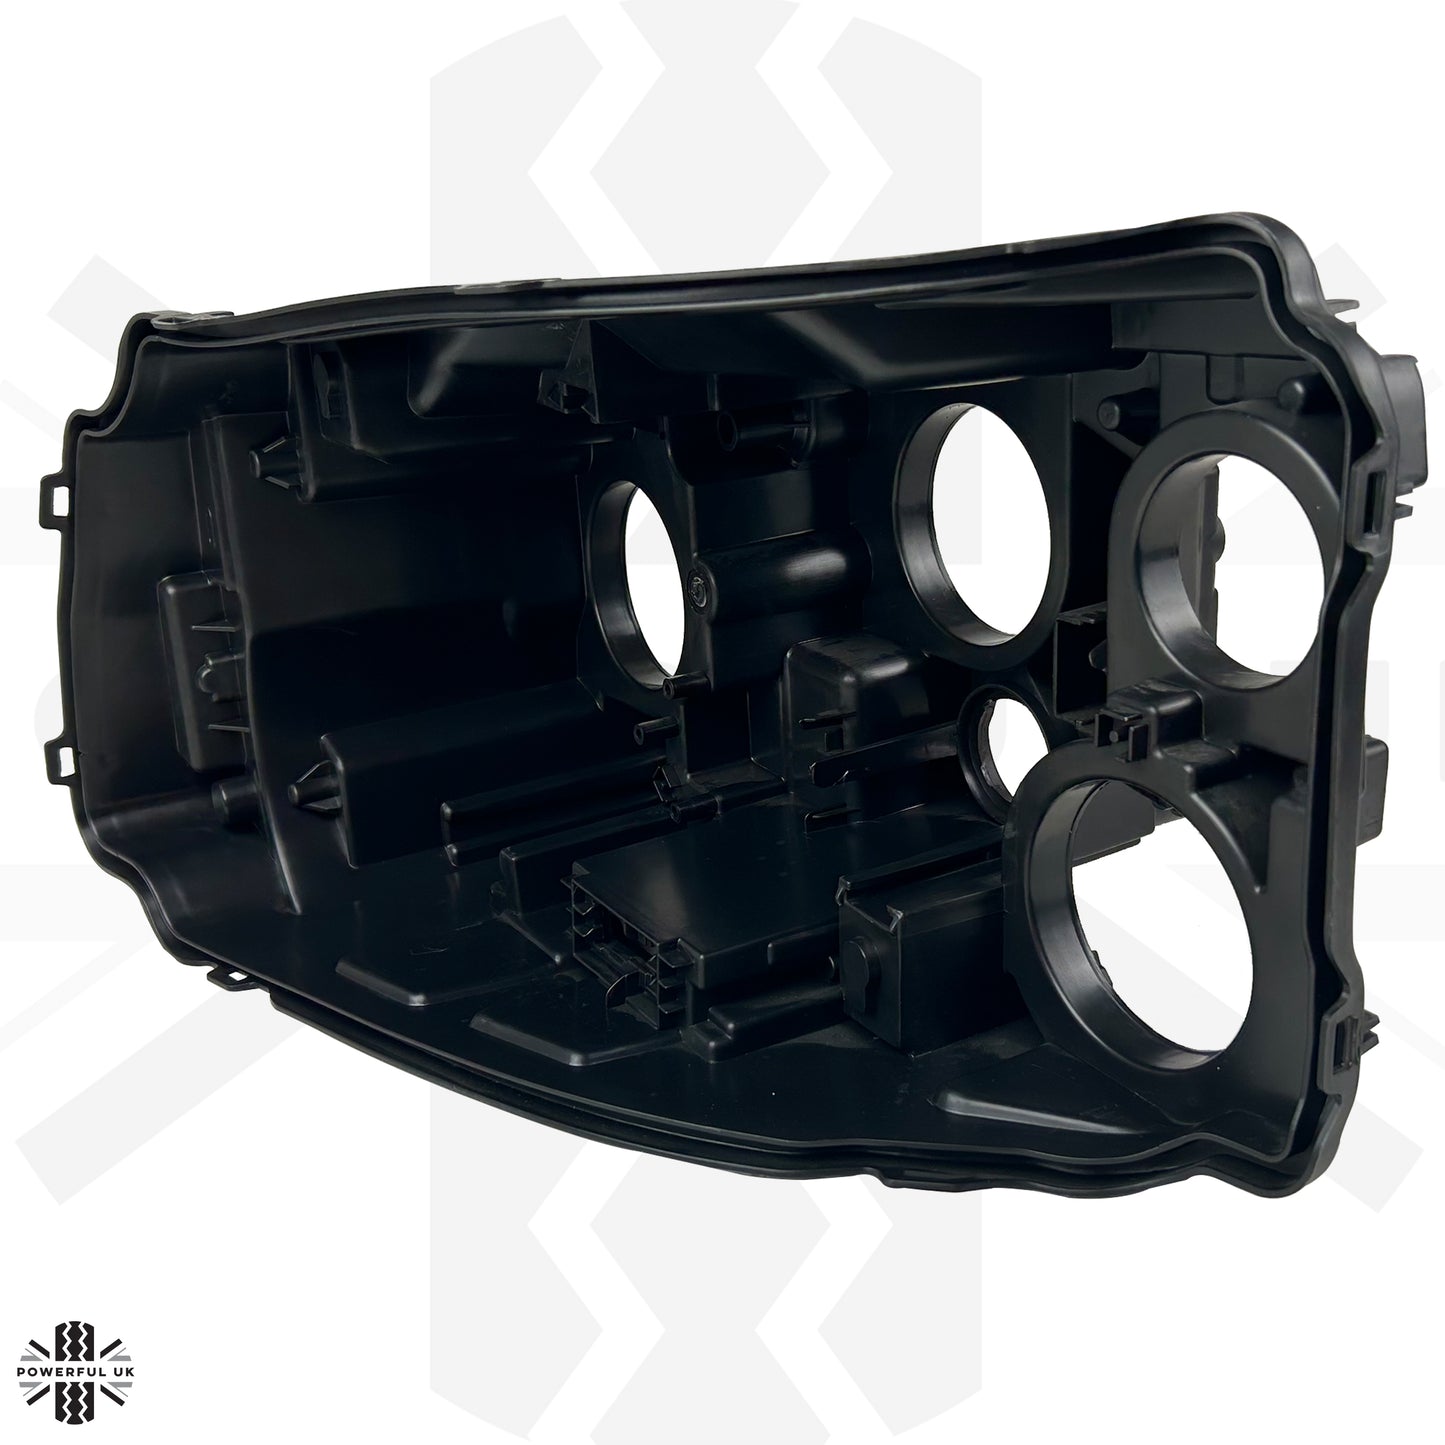 Replacement Headlight Rear Housing for Range Rover Sport L320 2010-13 - LH